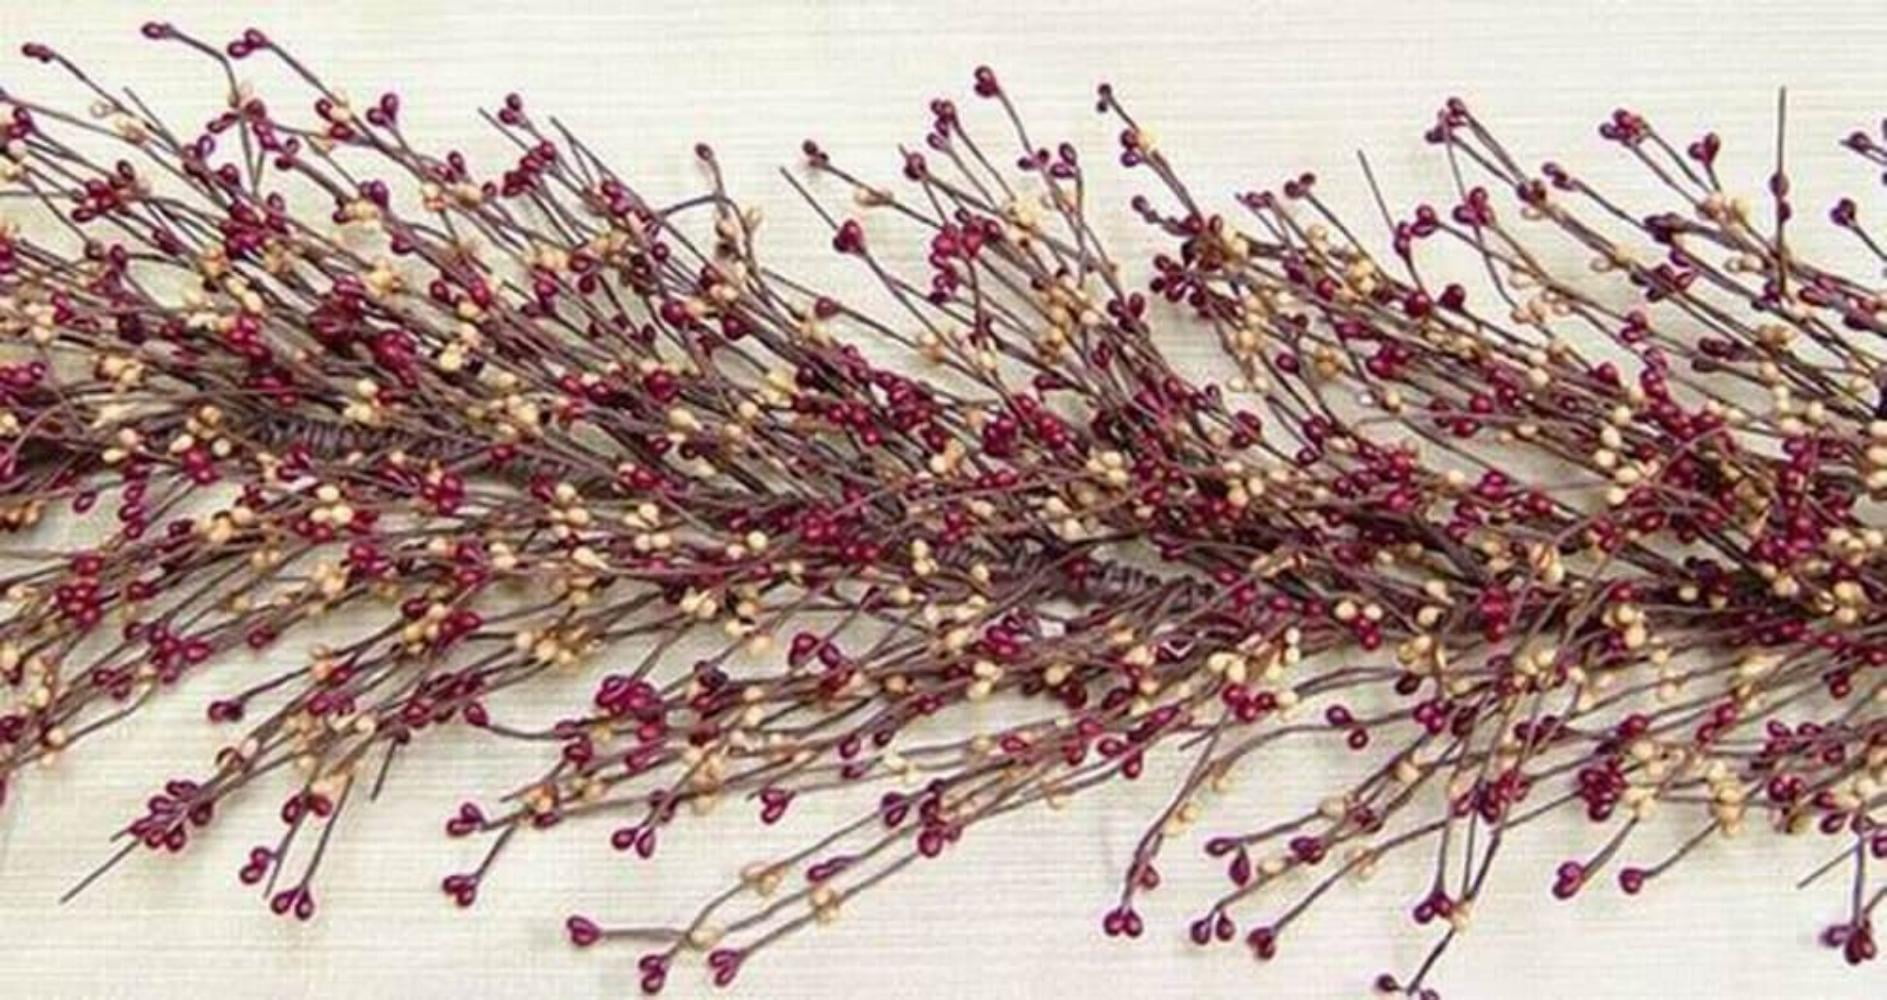 Burgundy 4-Feet CWI Gifts Bell and Pip Garland